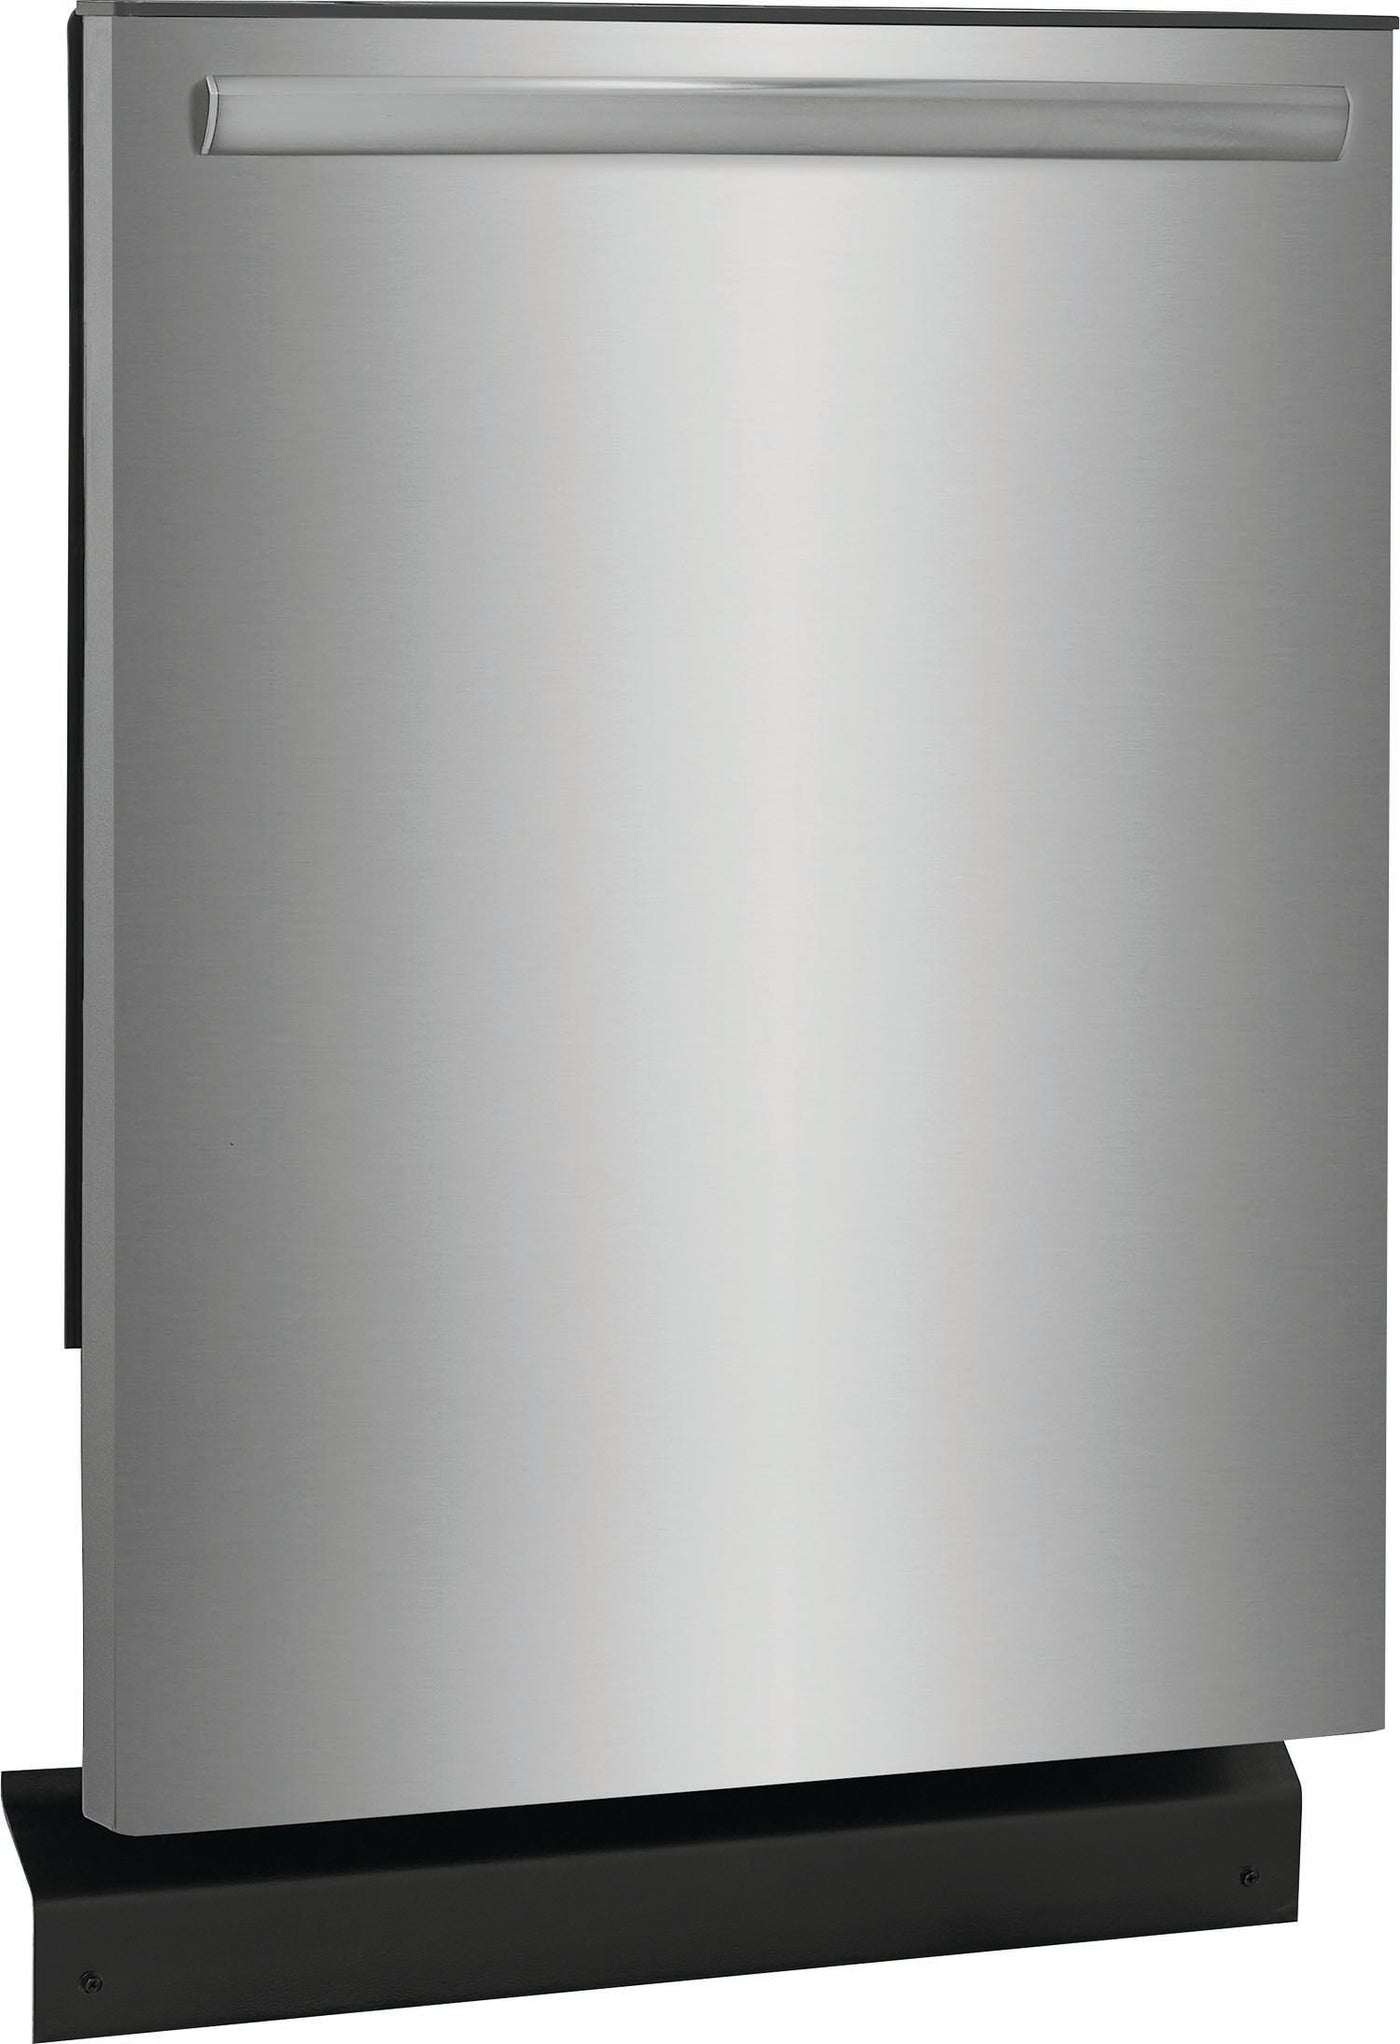 Frigidaire Gallery Smudge-Proof Stainless Steel 24" Built-In Dishwasher - GDPH4515AF